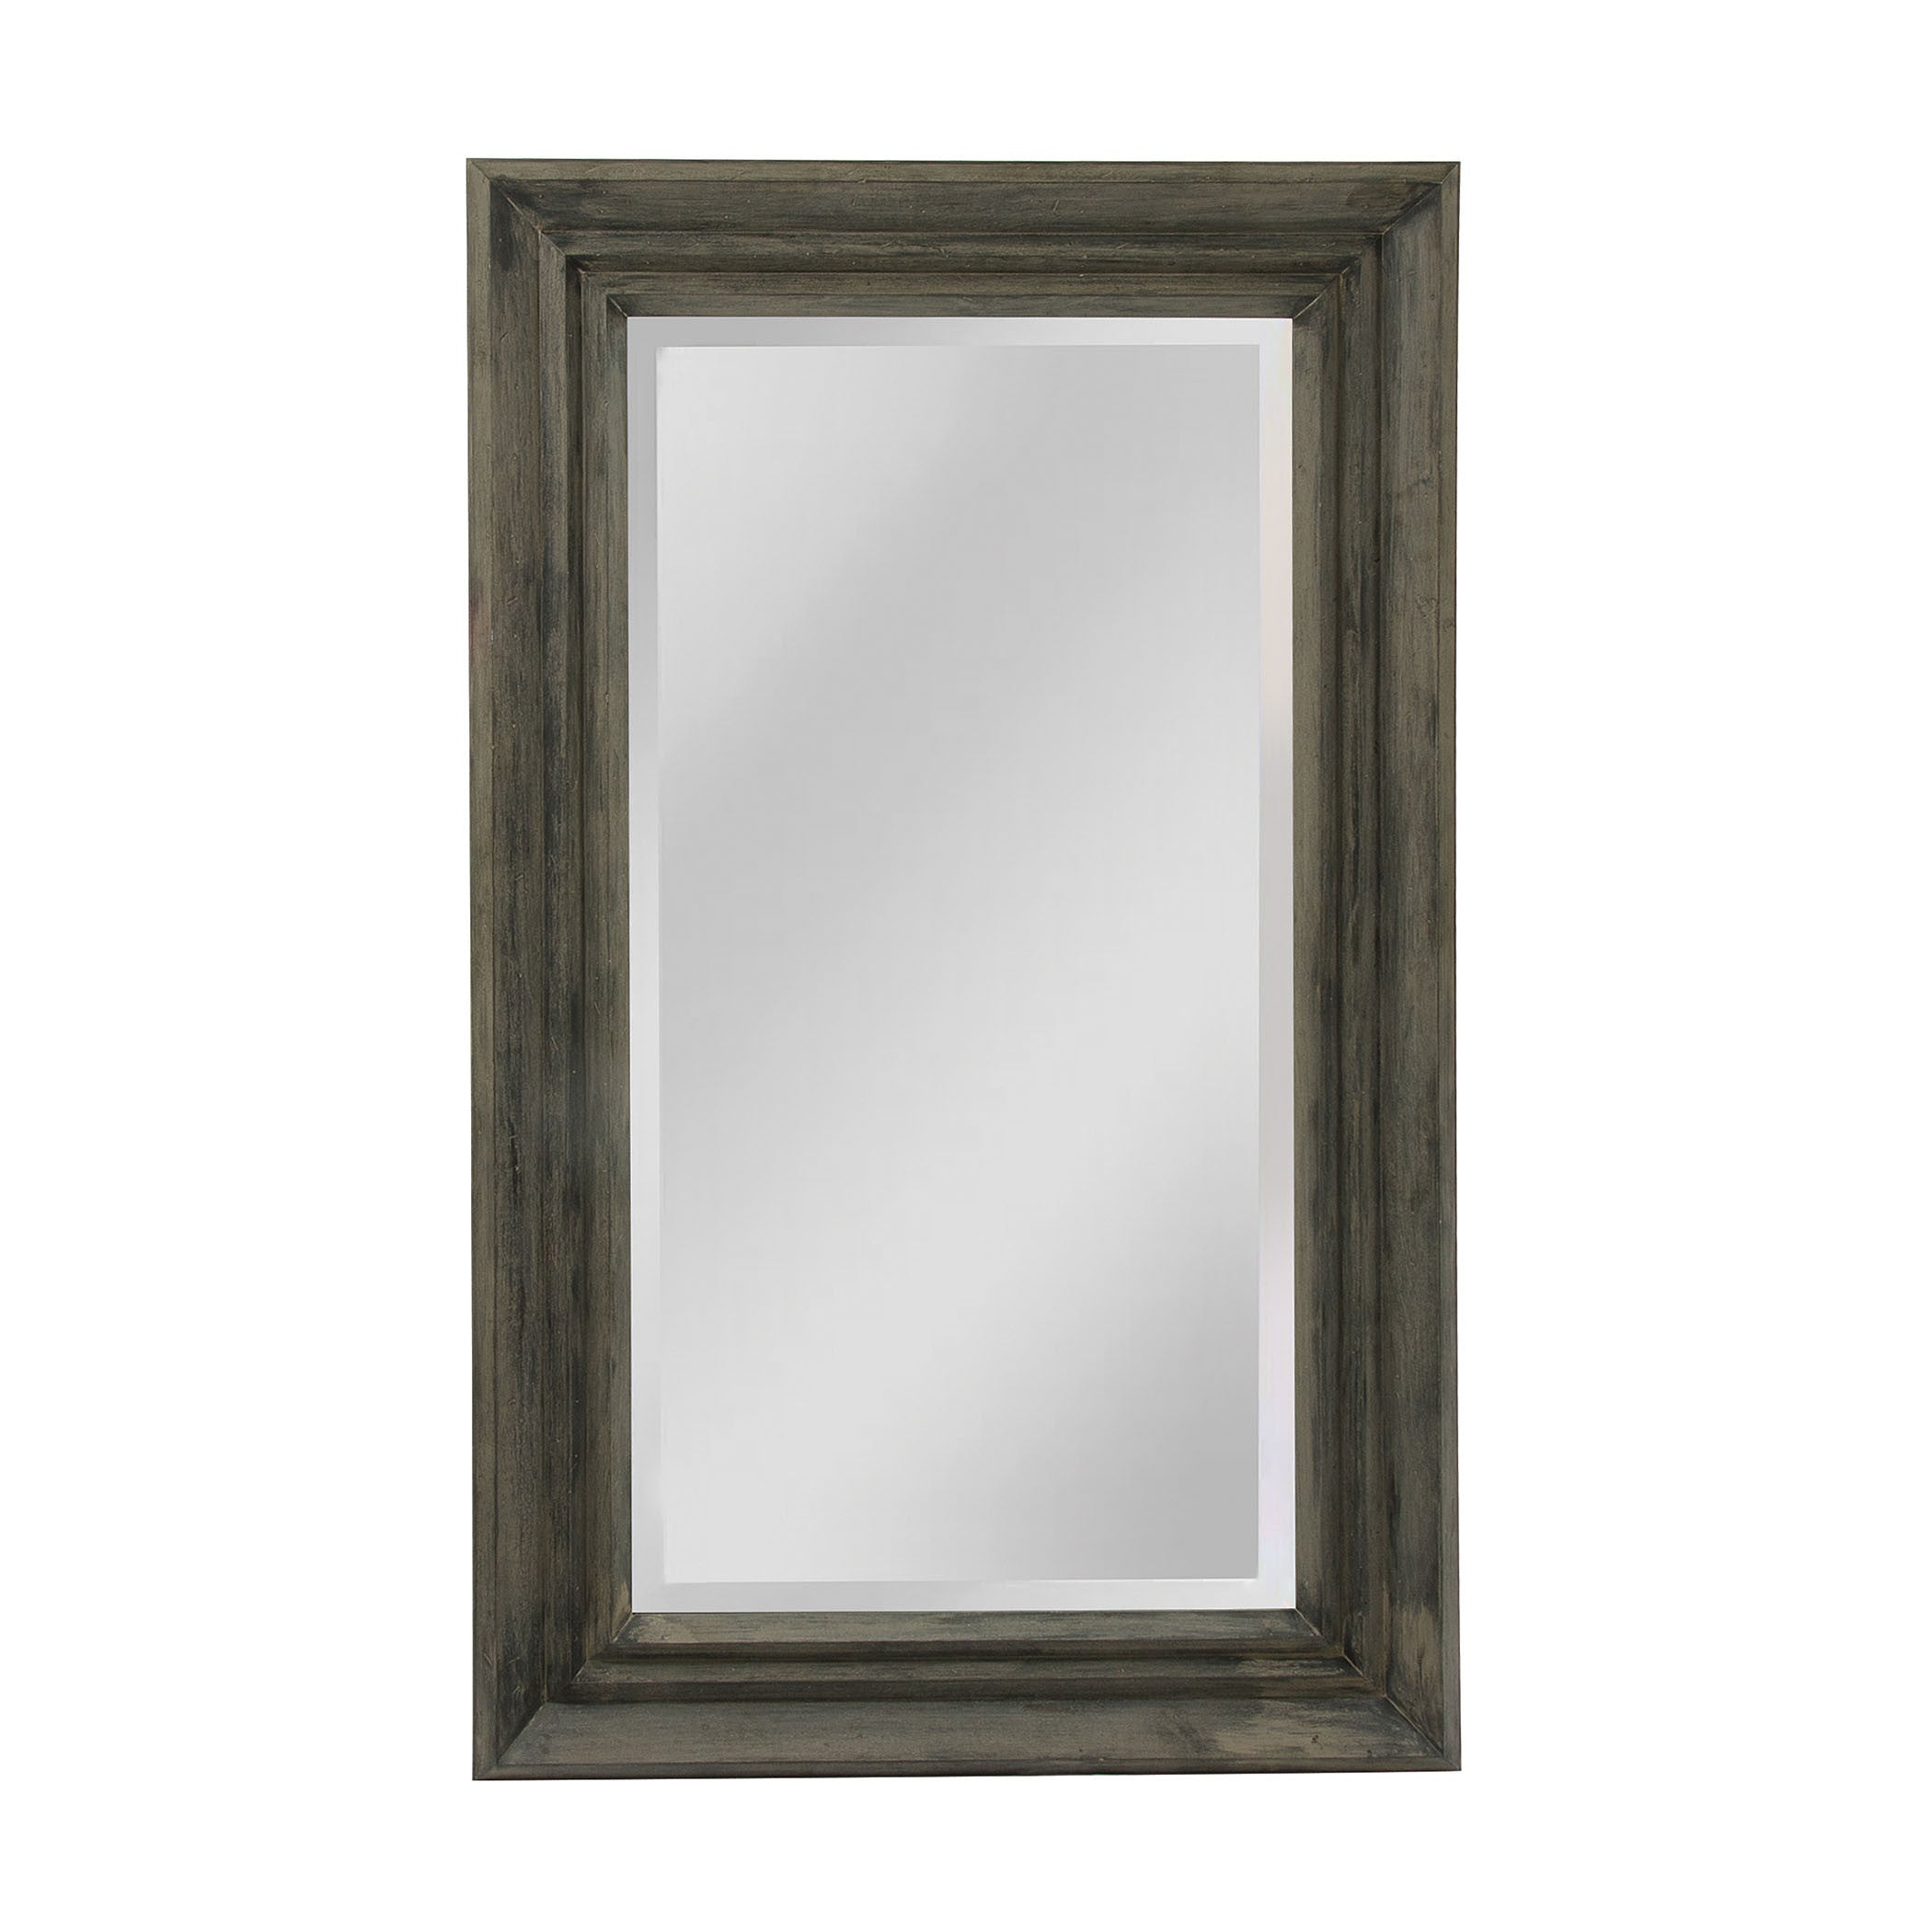 Mirror Masters Mw4012-0058 Dewitt Collection Natural Finish Wall Mirror